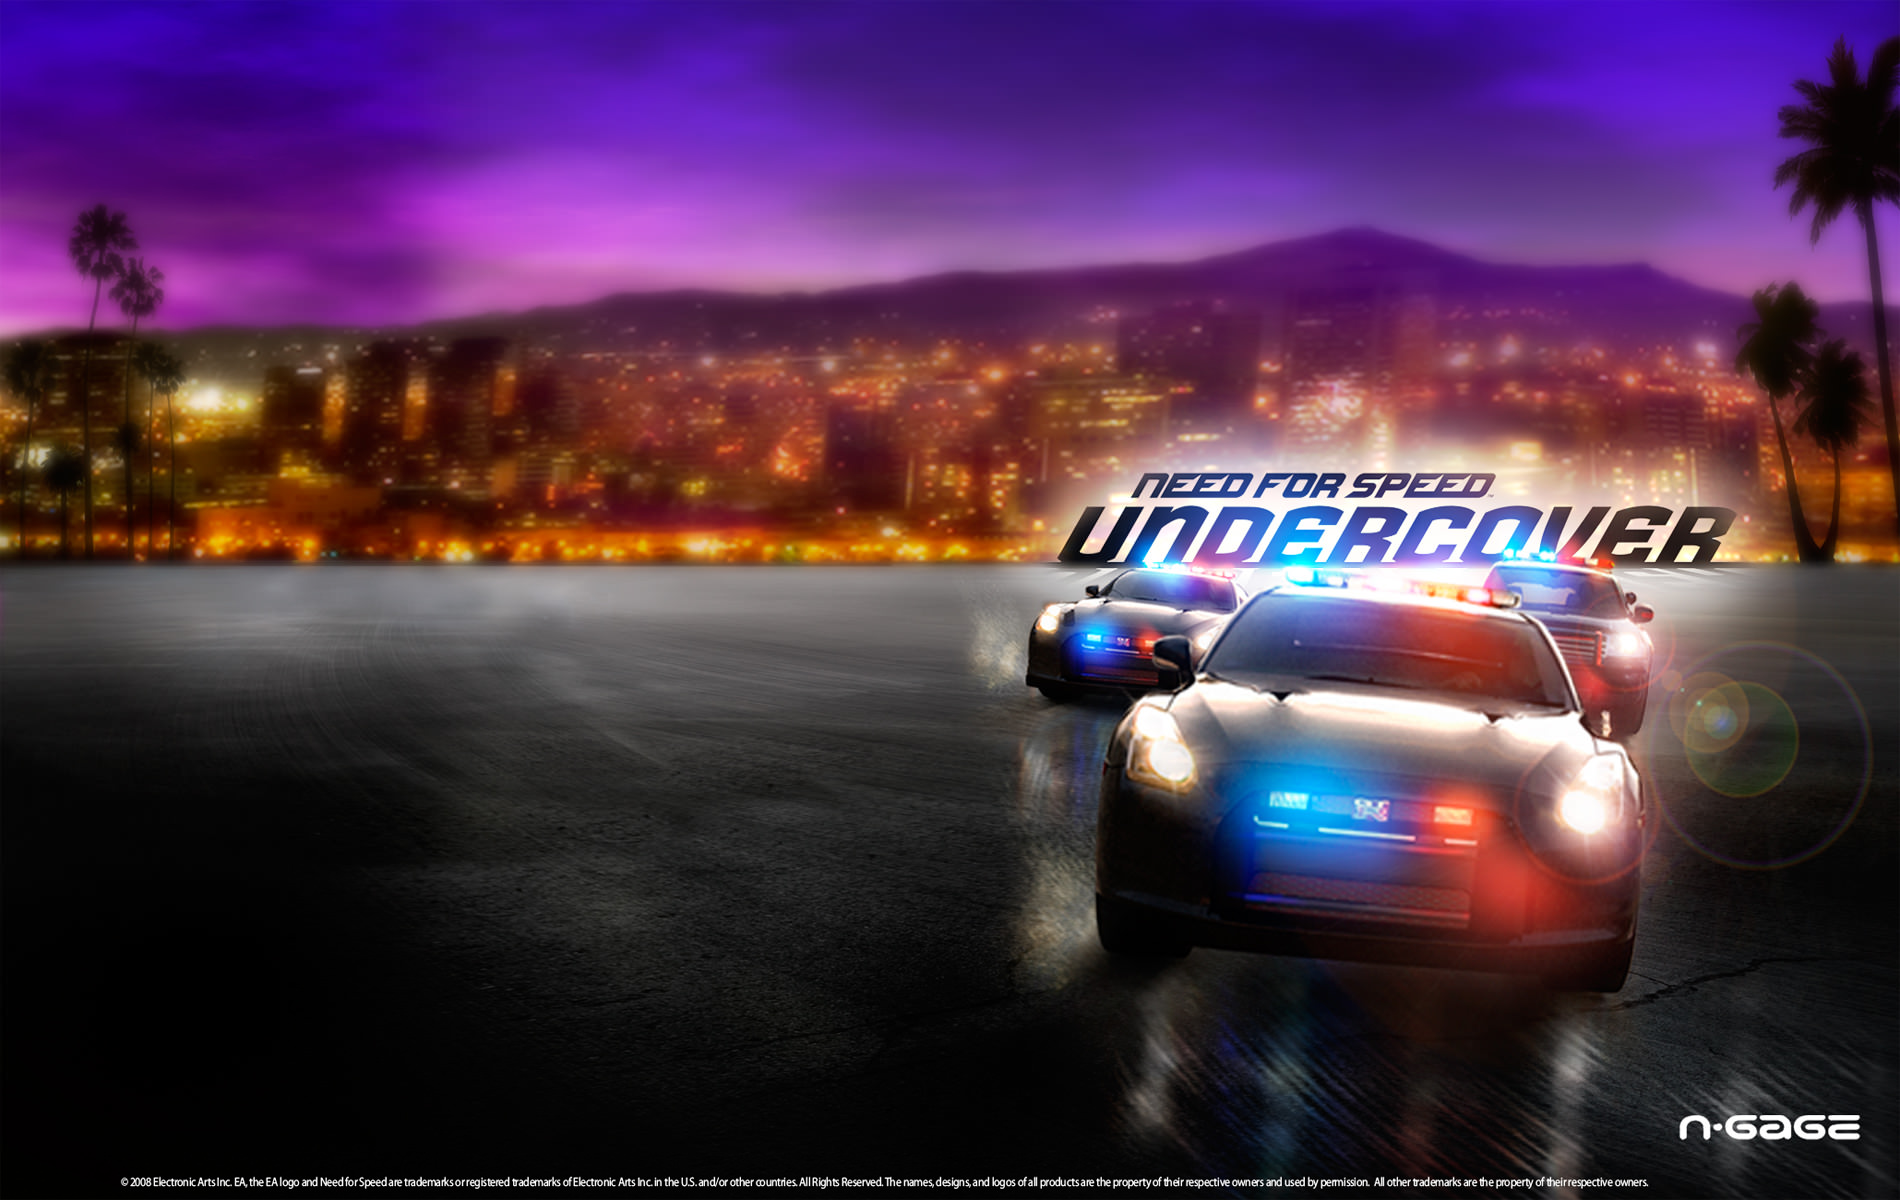 NFS Need for speed wallpaper